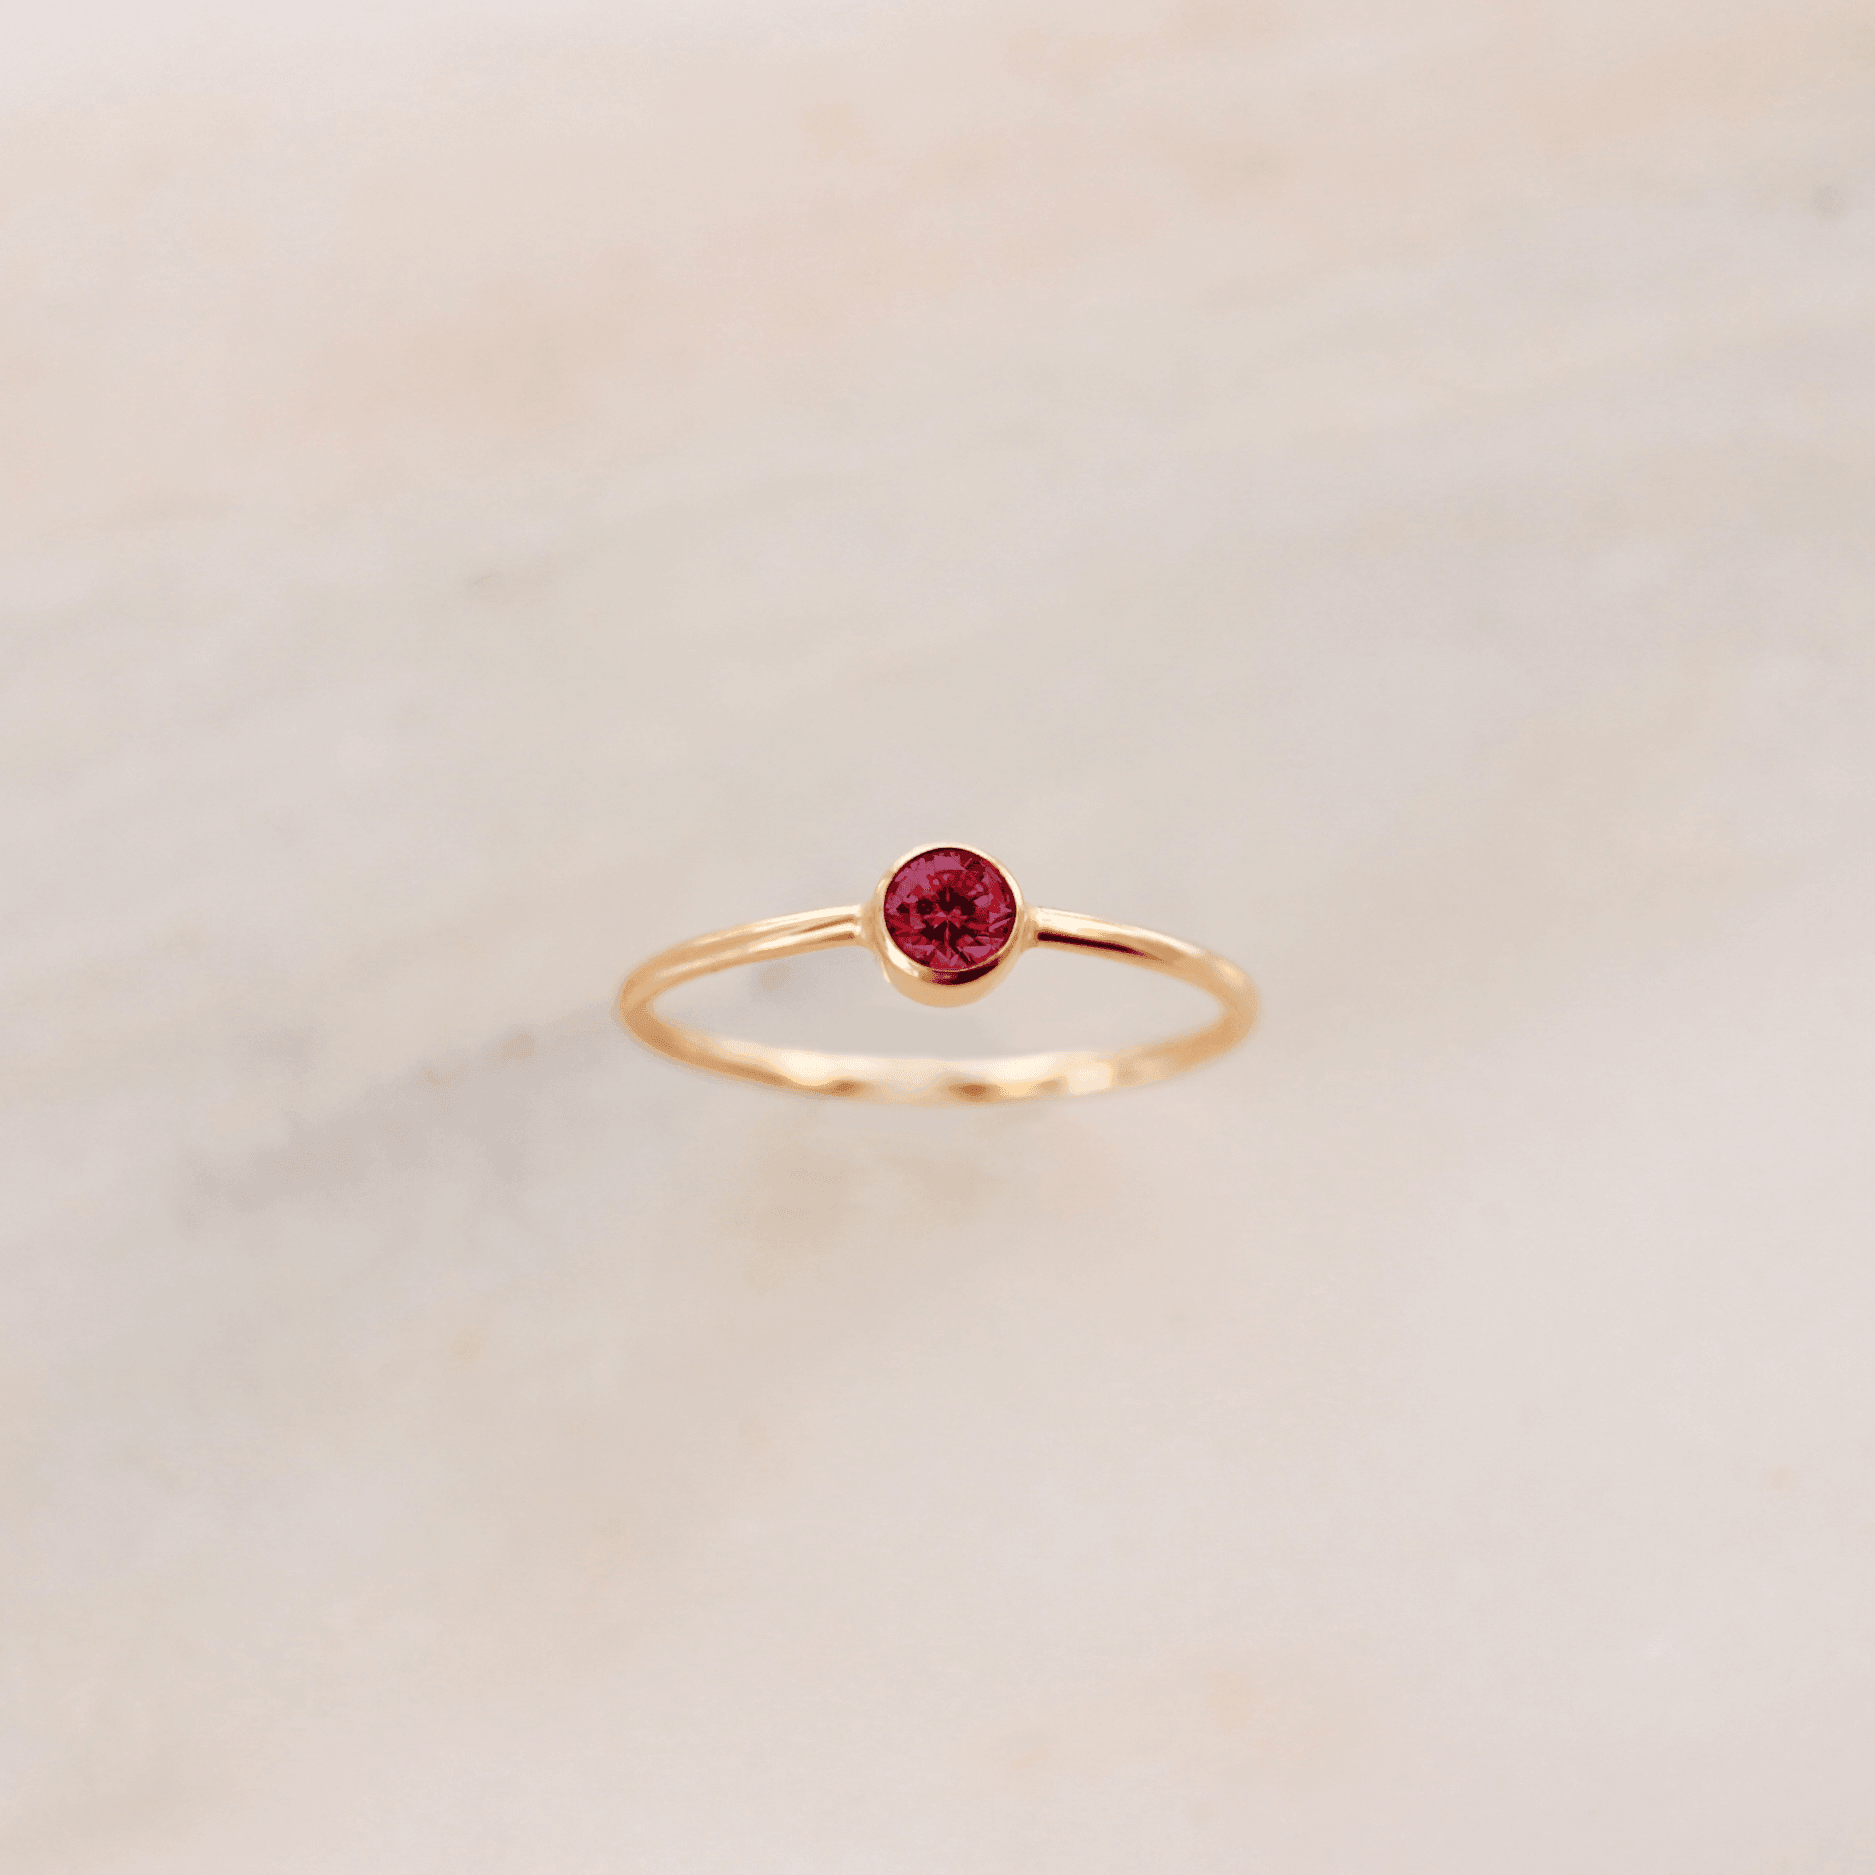 July Birthstone Ring ∙ Pink Ruby - Nolia Jewelry - Meaningful + Sustainably Handcrafted Jewelry